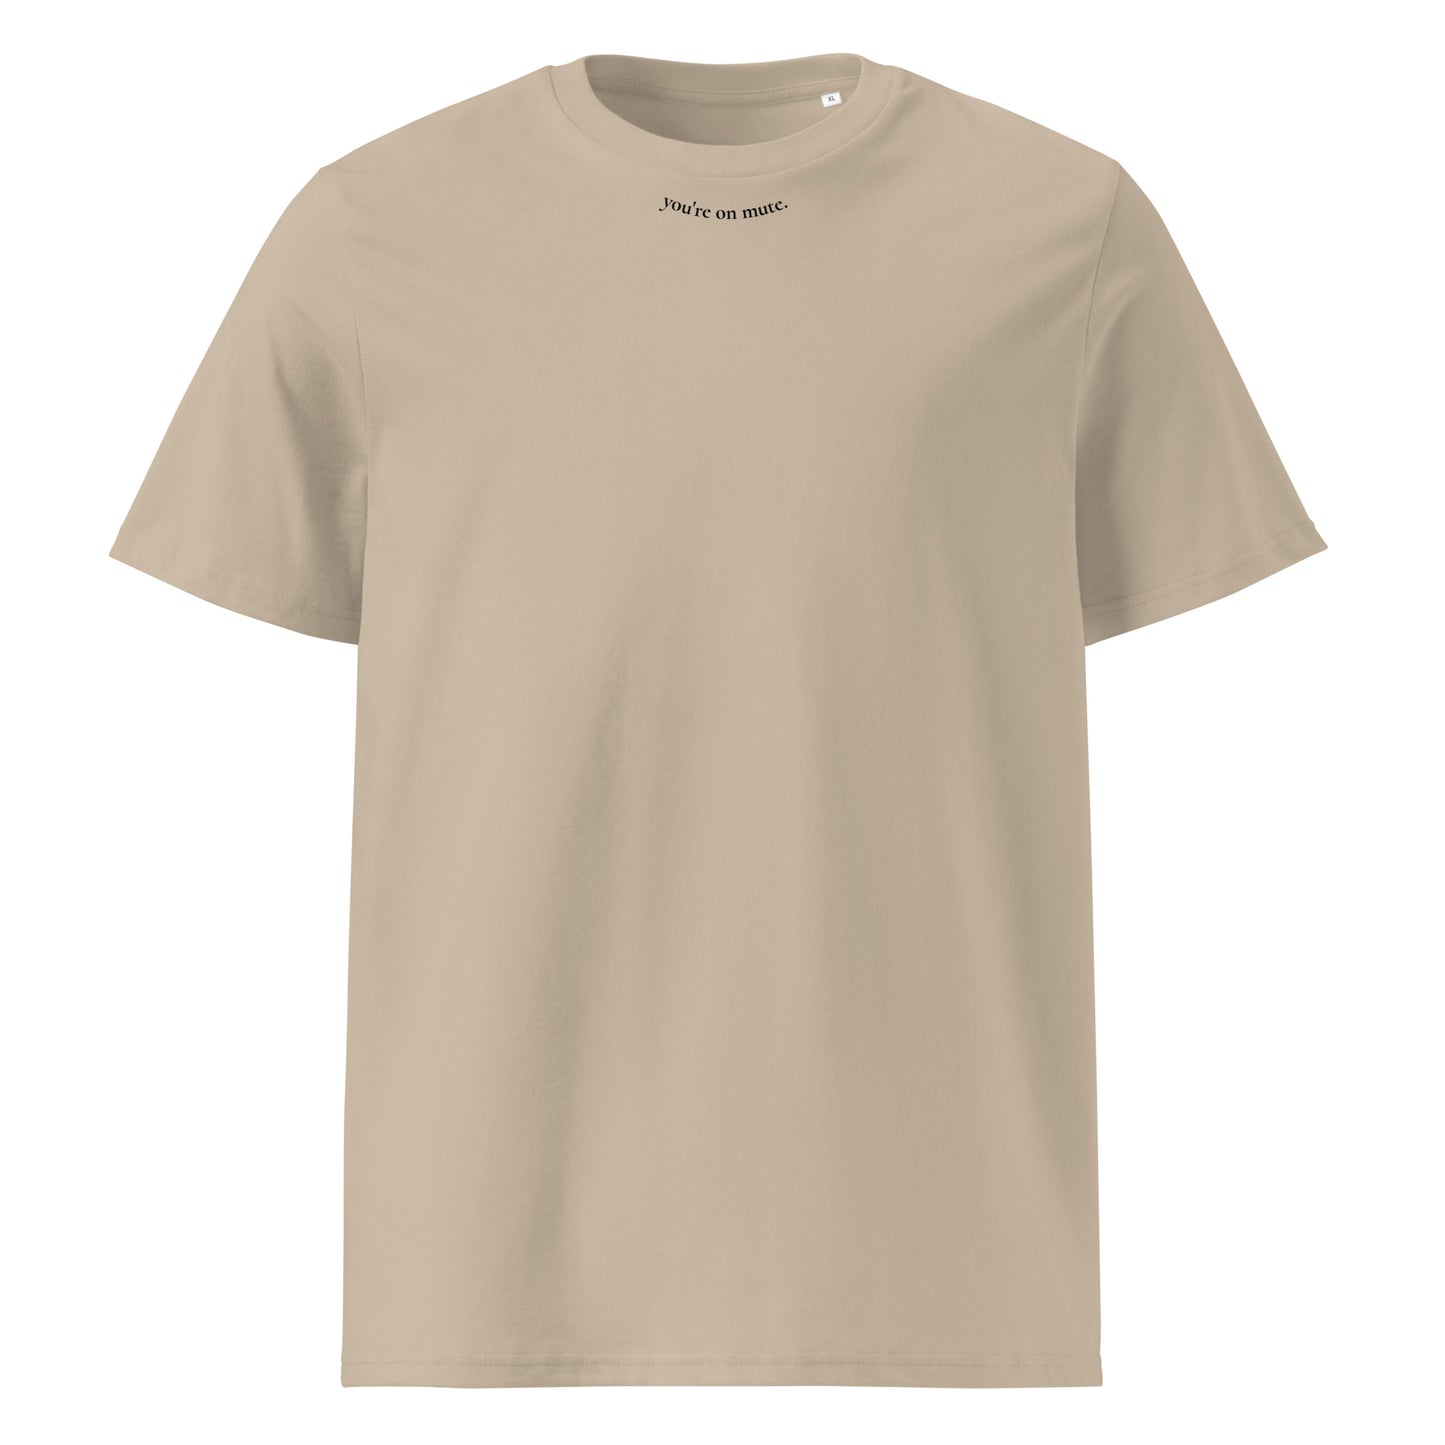 sueed. organic cotton t-shirt - you're on mute.